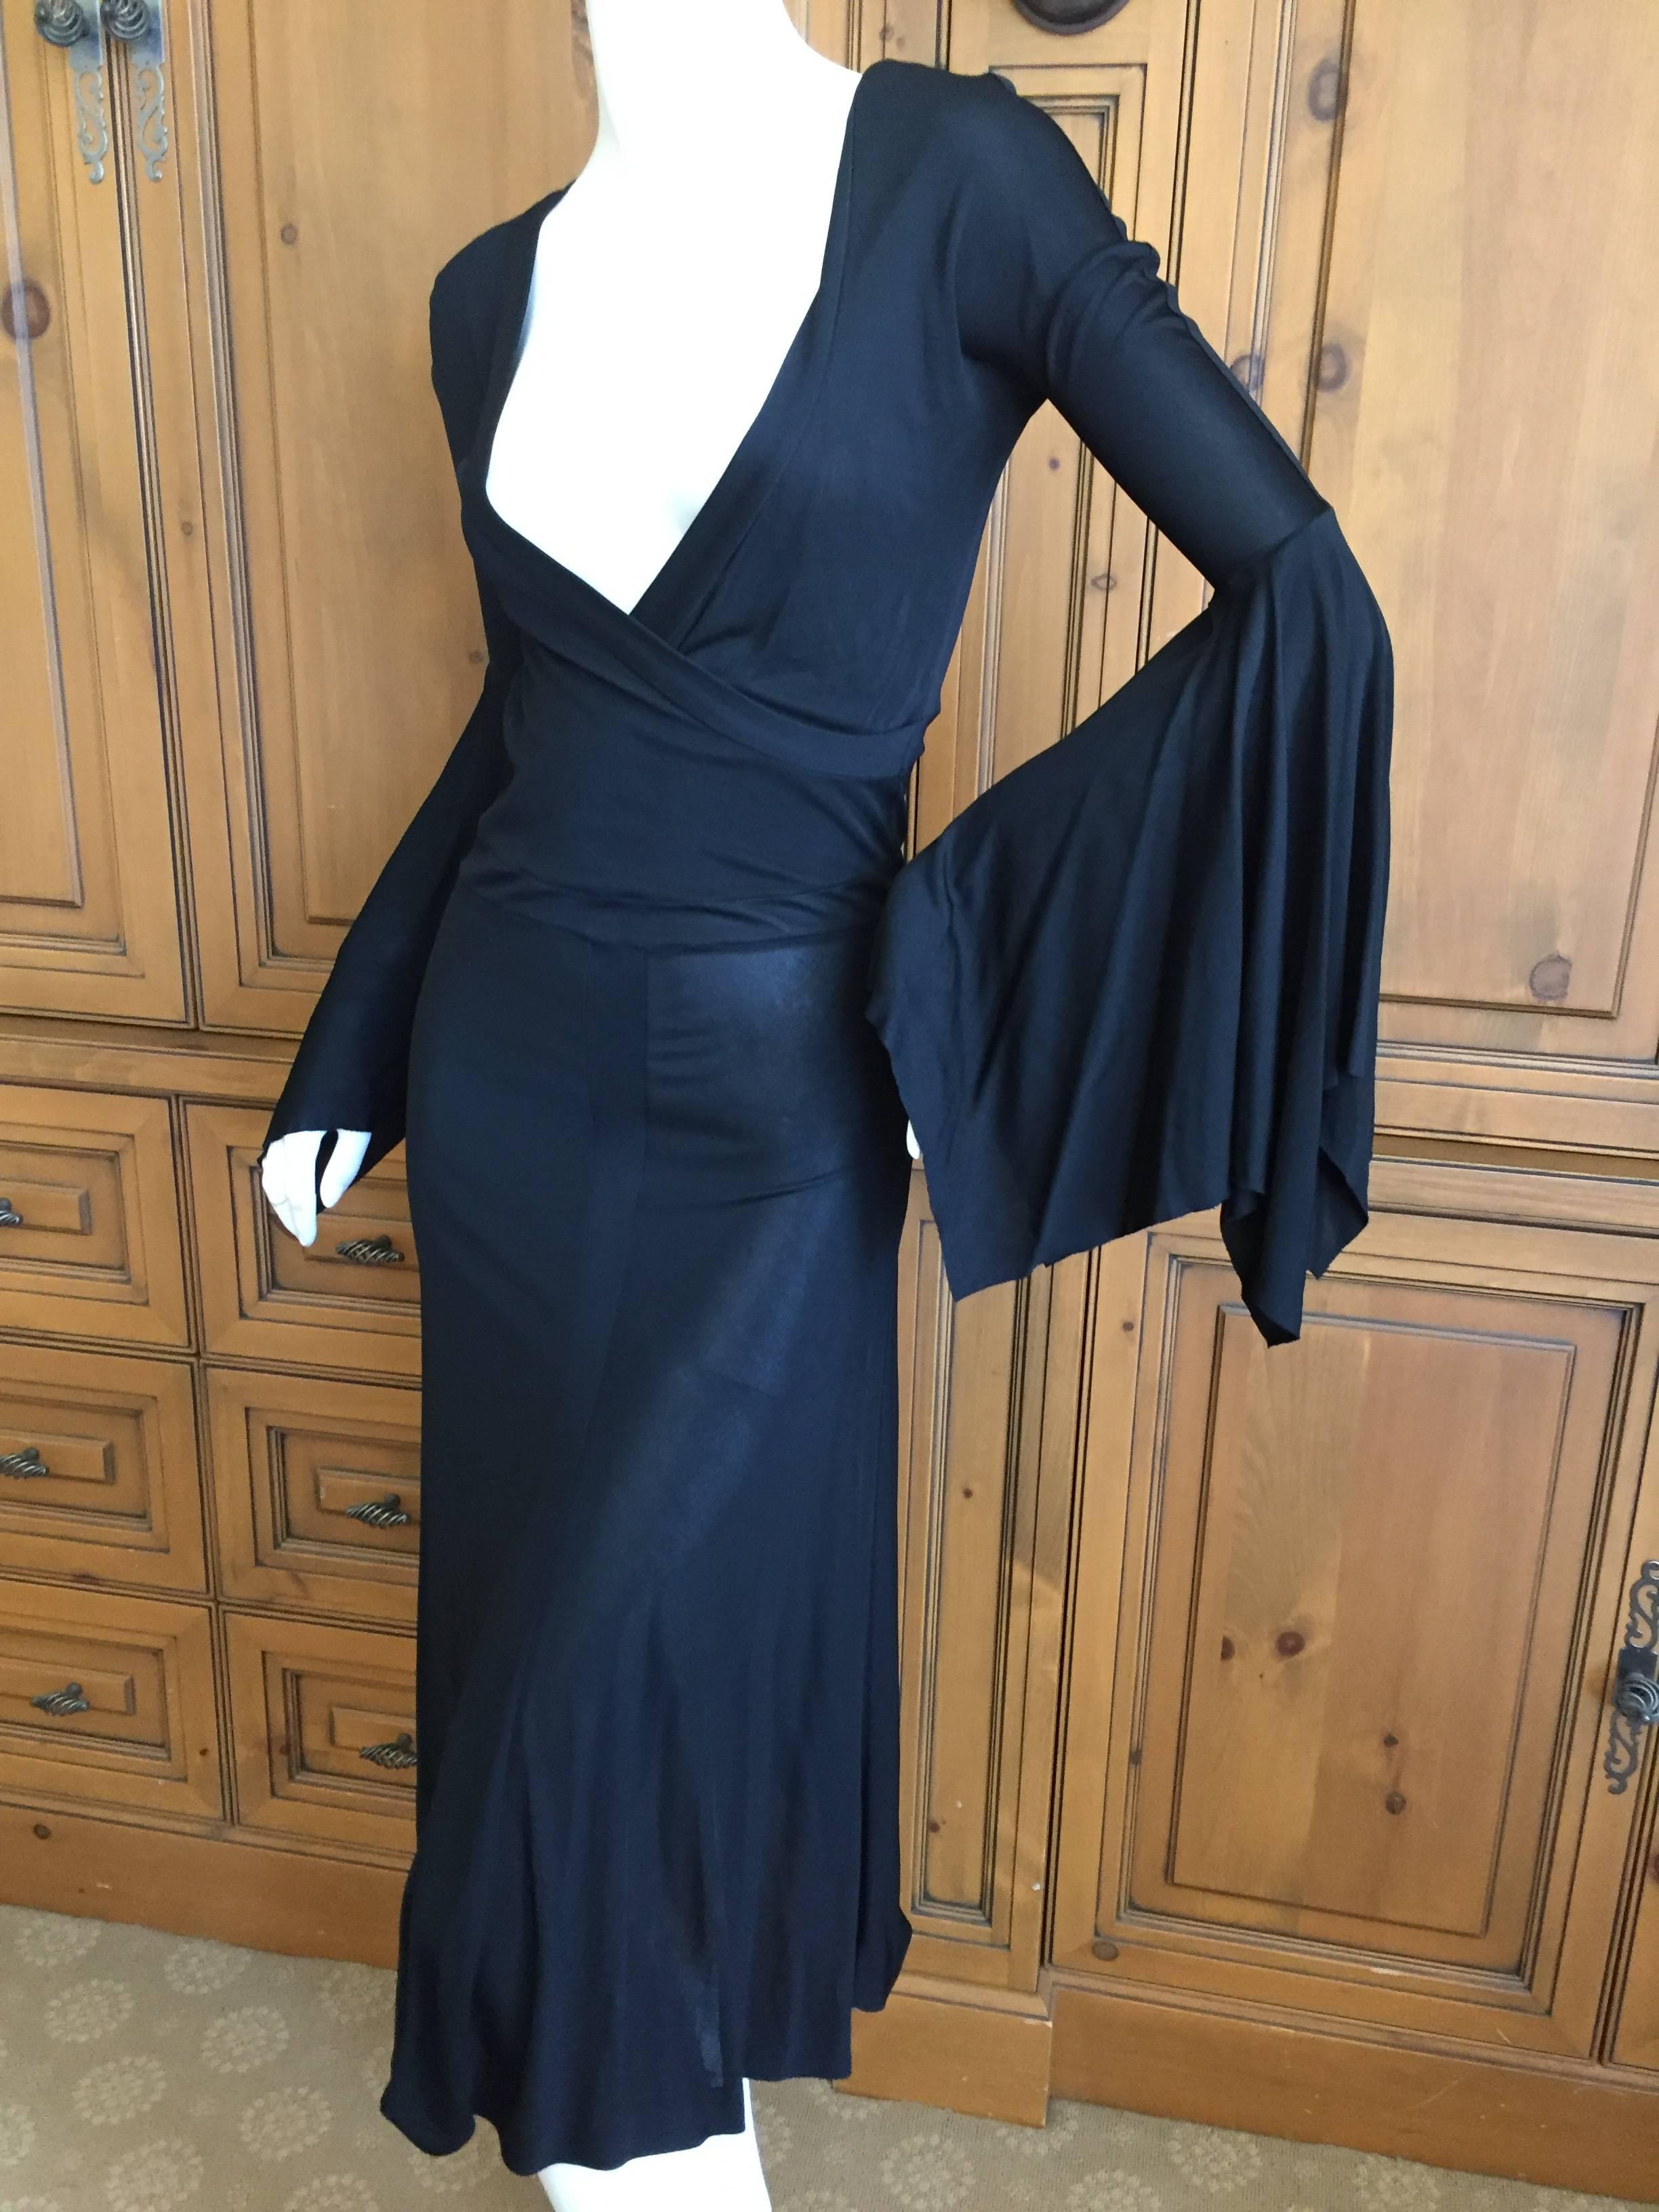 Tom Ford Yves Saint Laurent Bell Sleeve Dress In Excellent Condition In Cloverdale, CA